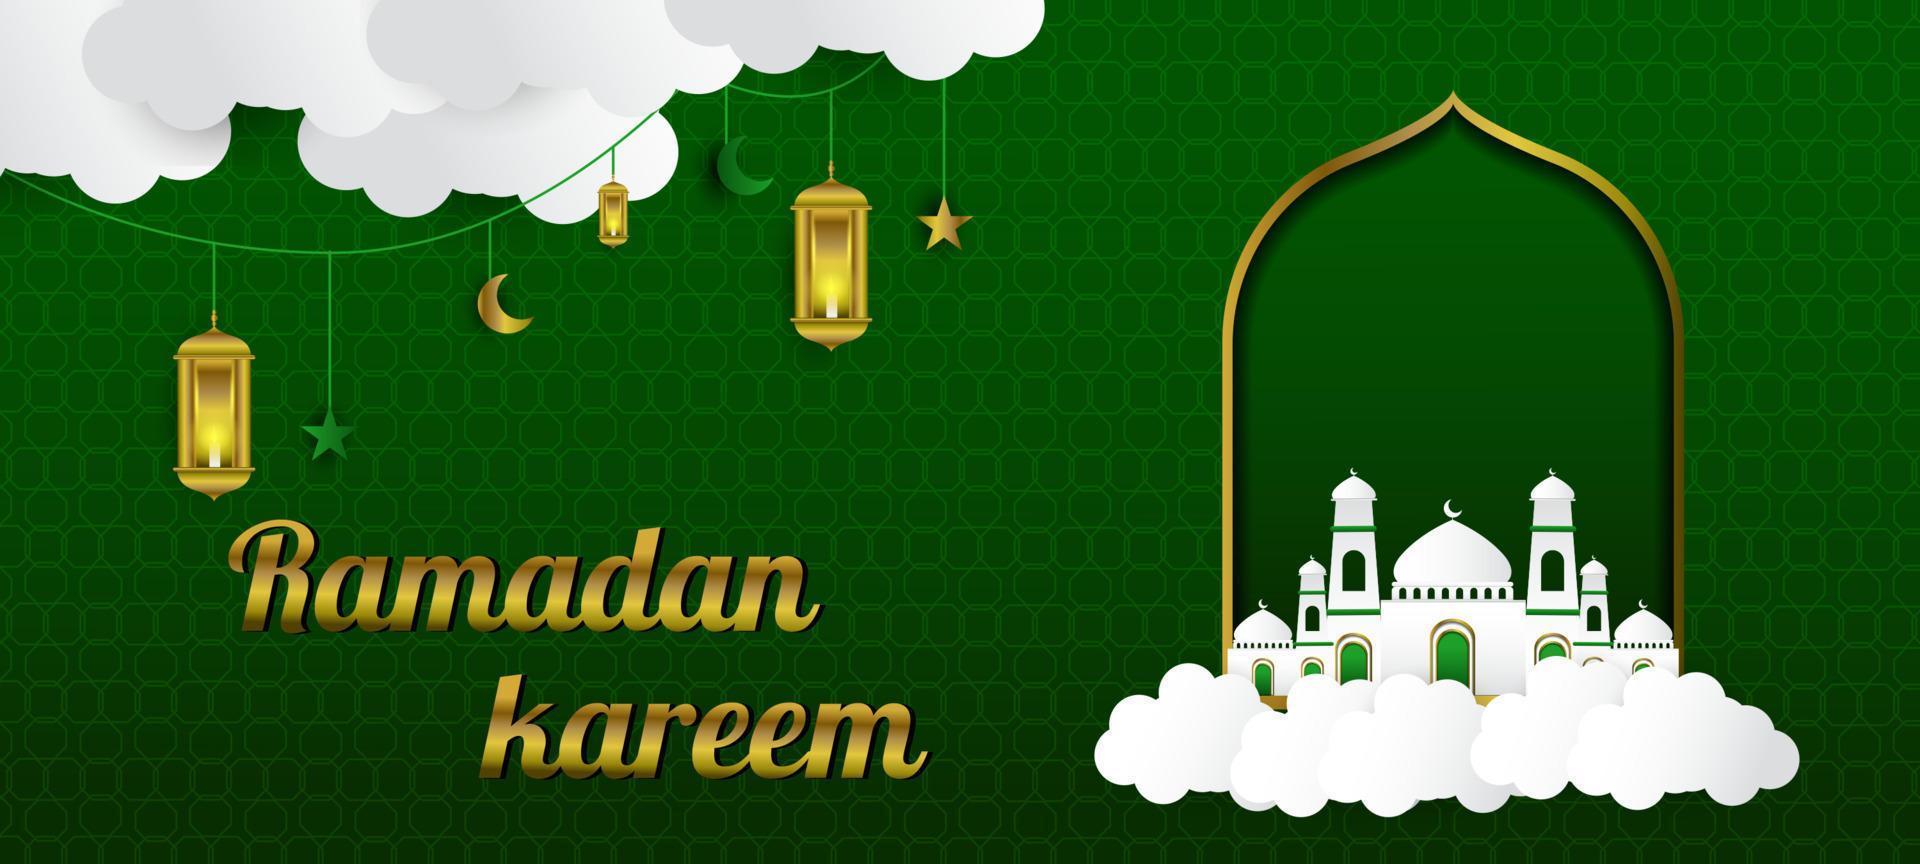 Ramadan banner design, Islamic background design with mosque, lantern and clouds vector